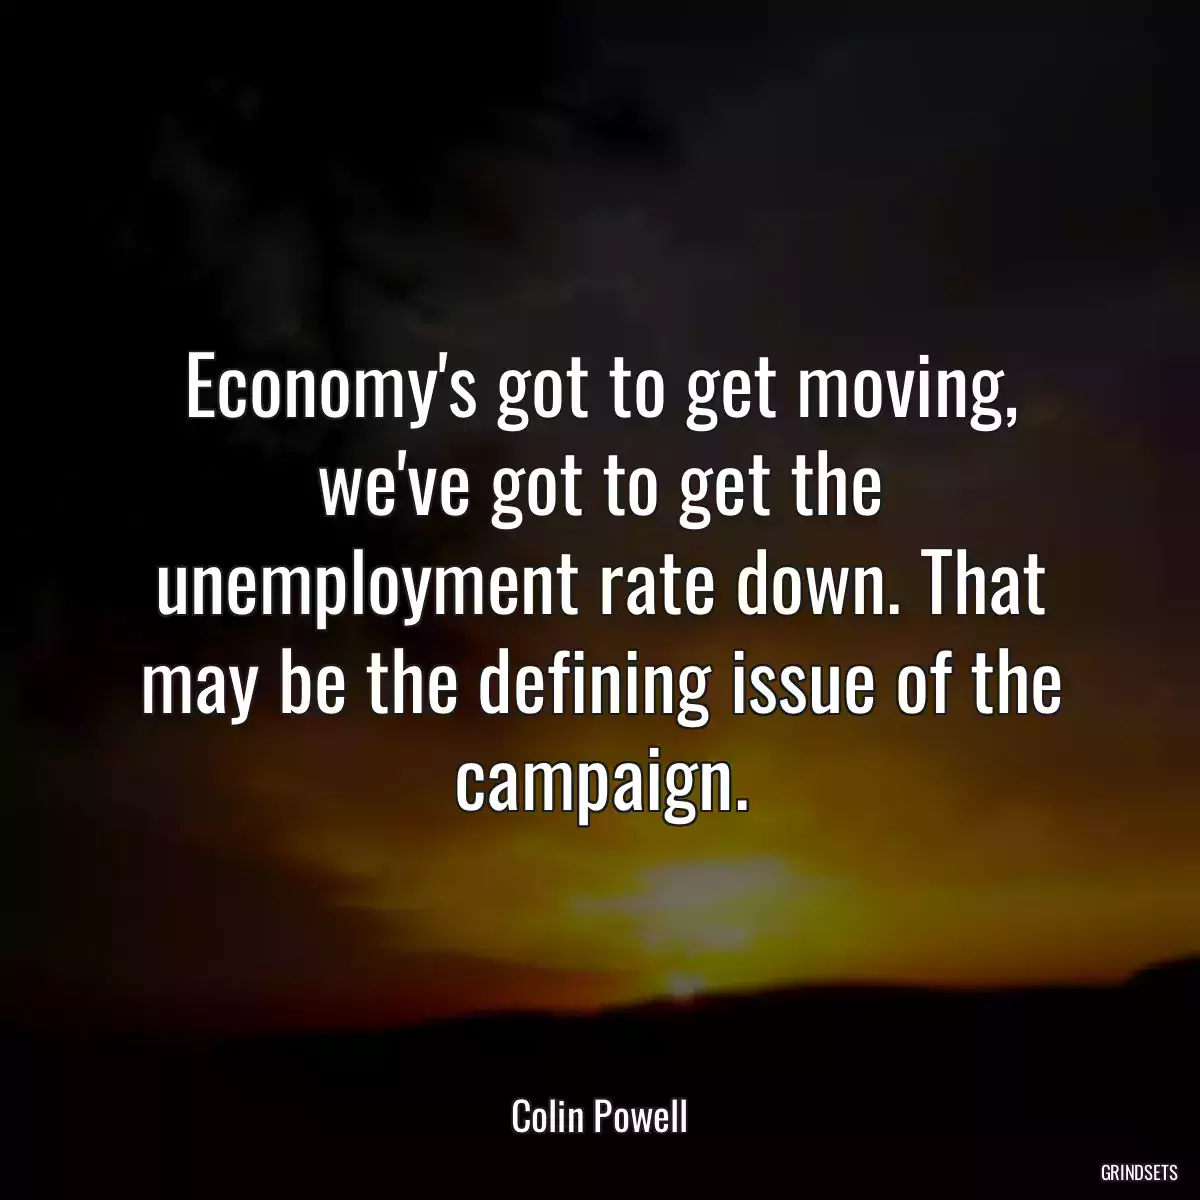 Economy\'s got to get moving, we\'ve got to get the unemployment rate down. That may be the defining issue of the campaign.